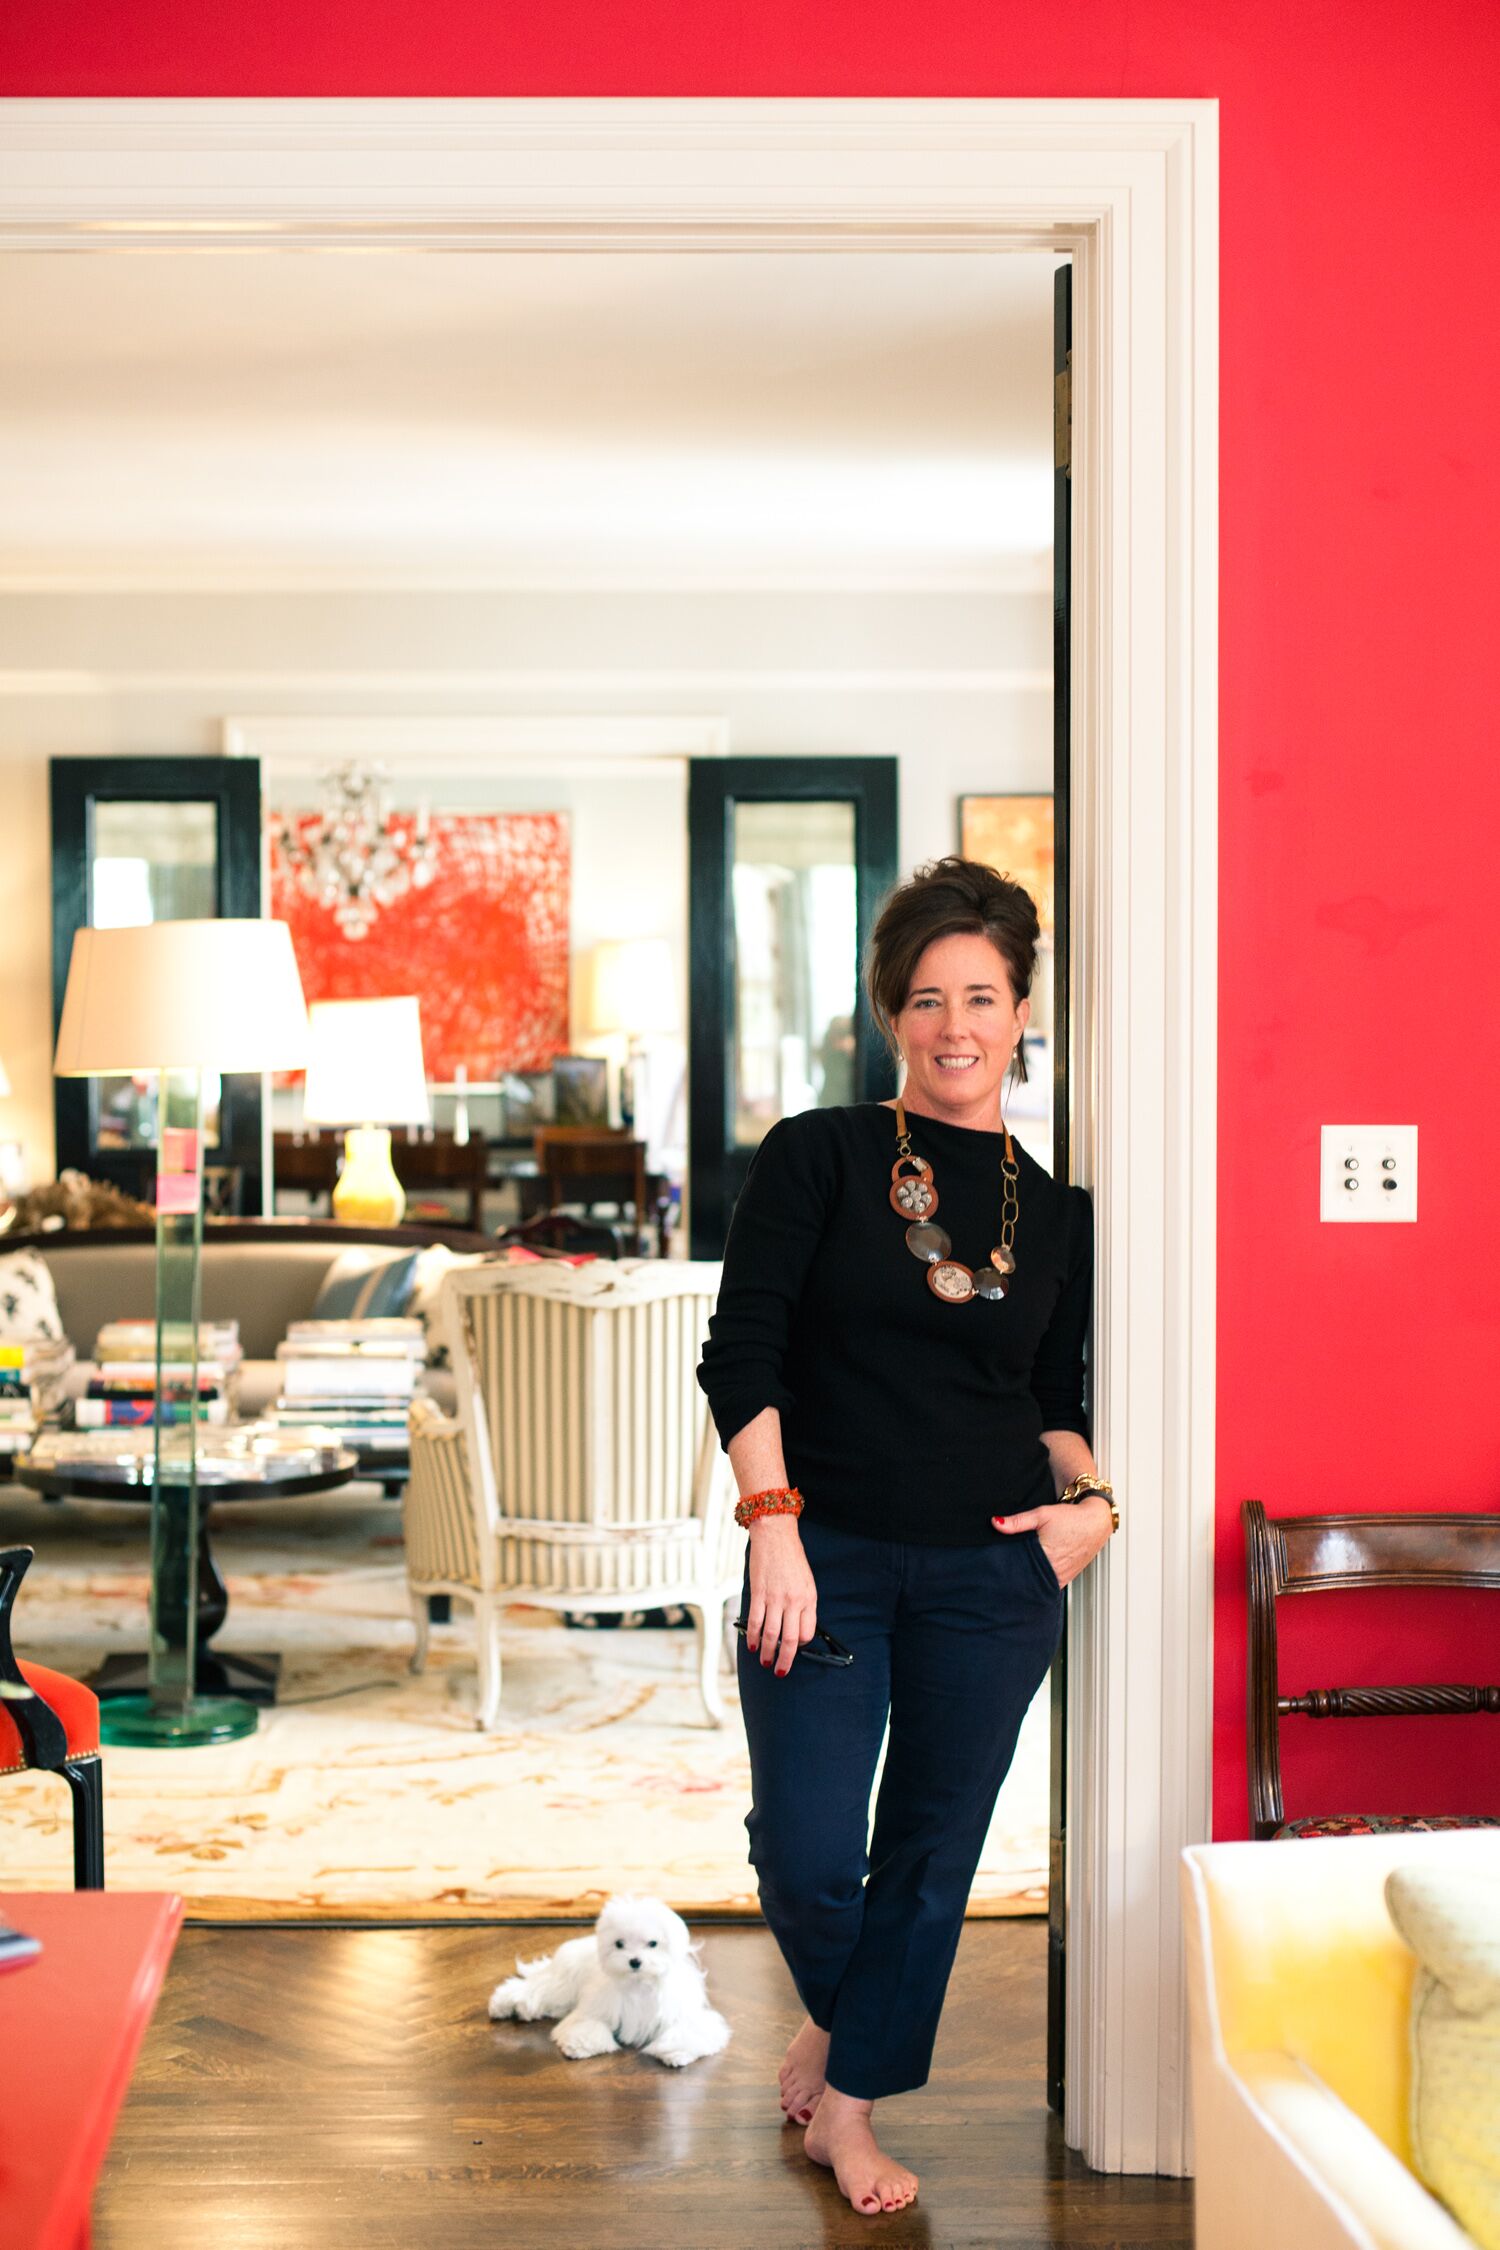 kate-spade-home-new-york-city-apartment-red-walls